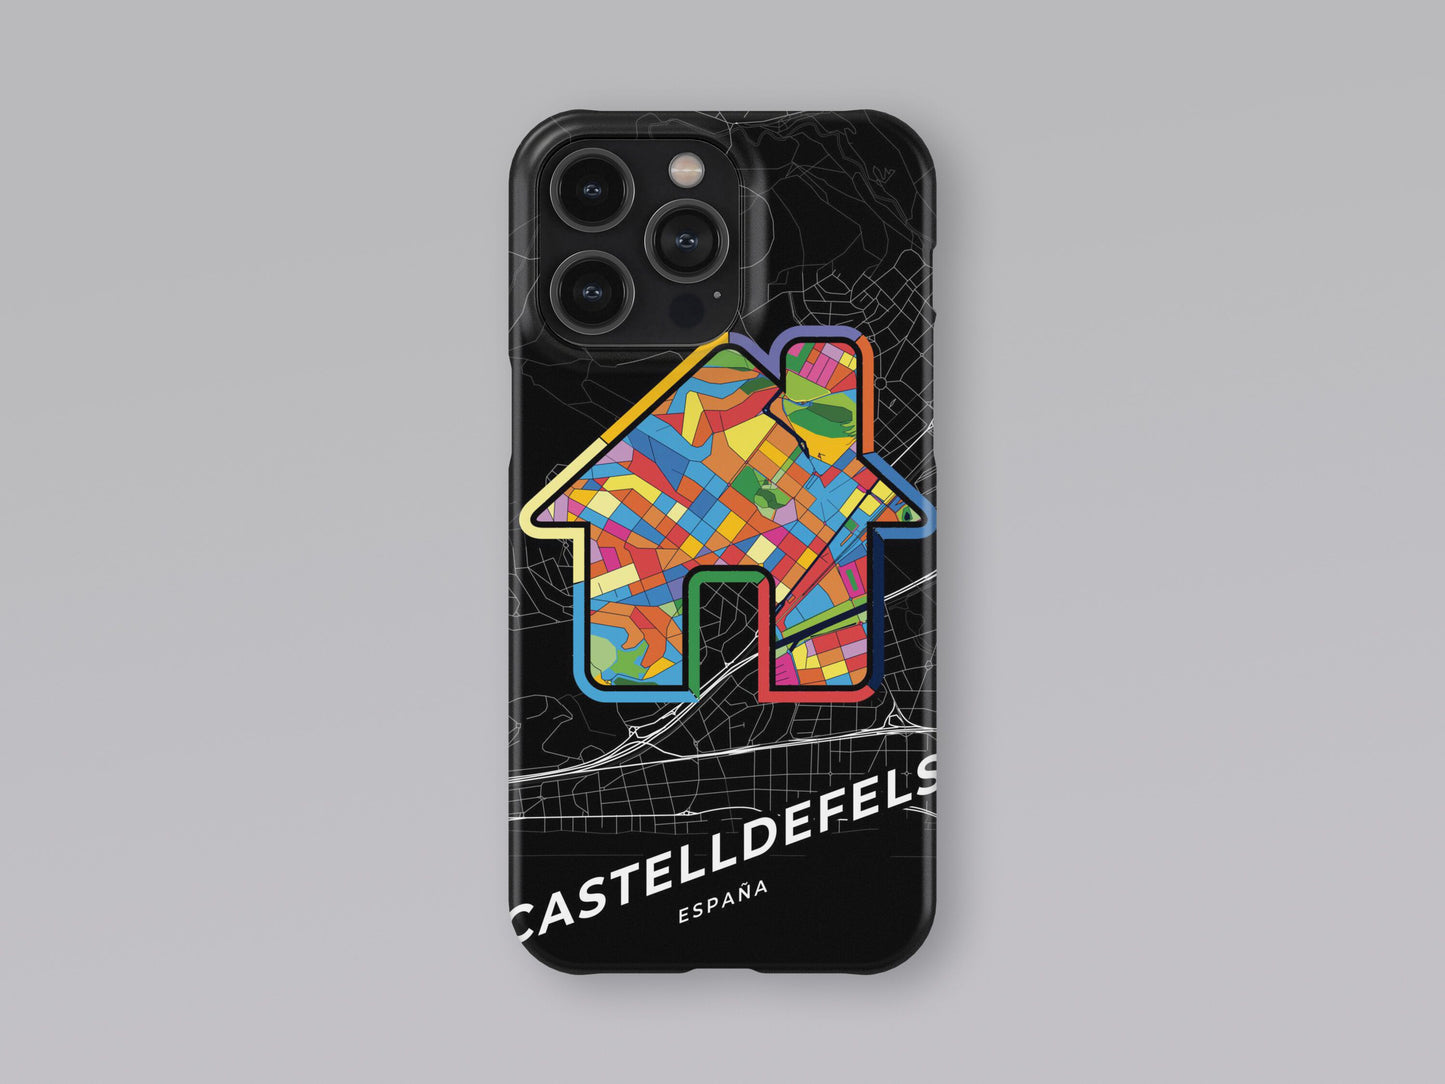 Castelldefels Spain slim phone case with colorful icon. Birthday, wedding or housewarming gift. Couple match cases. 3